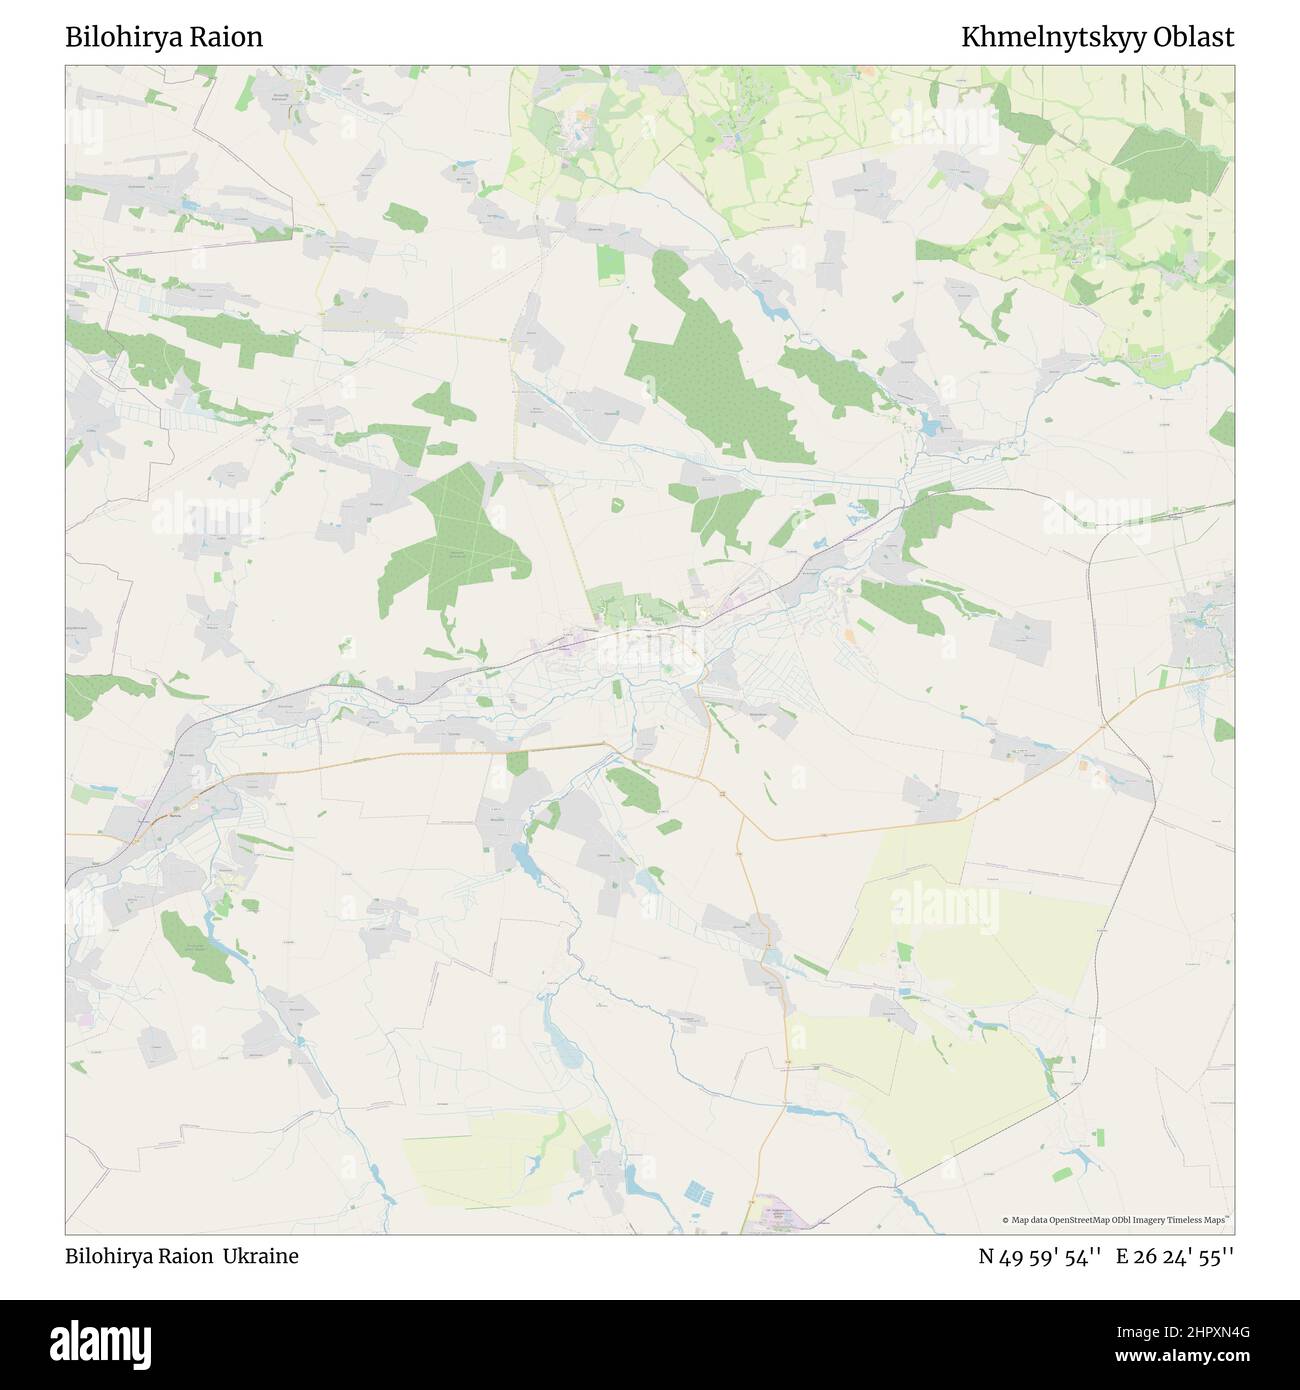 Bilohirya Raion, Bilohirya Raion, Ukraine, Khmelnytskyy Oblast, N 49 59' 54'', E 26 24' 55'', map, Timeless Map published in 2021. Travelers, explorers and adventurers like Florence Nightingale, David Livingstone, Ernest Shackleton, Lewis and Clark and Sherlock Holmes relied on maps to plan travels to the world's most remote corners, Timeless Maps is mapping most locations on the globe, showing the achievement of great dreams Stock Photo